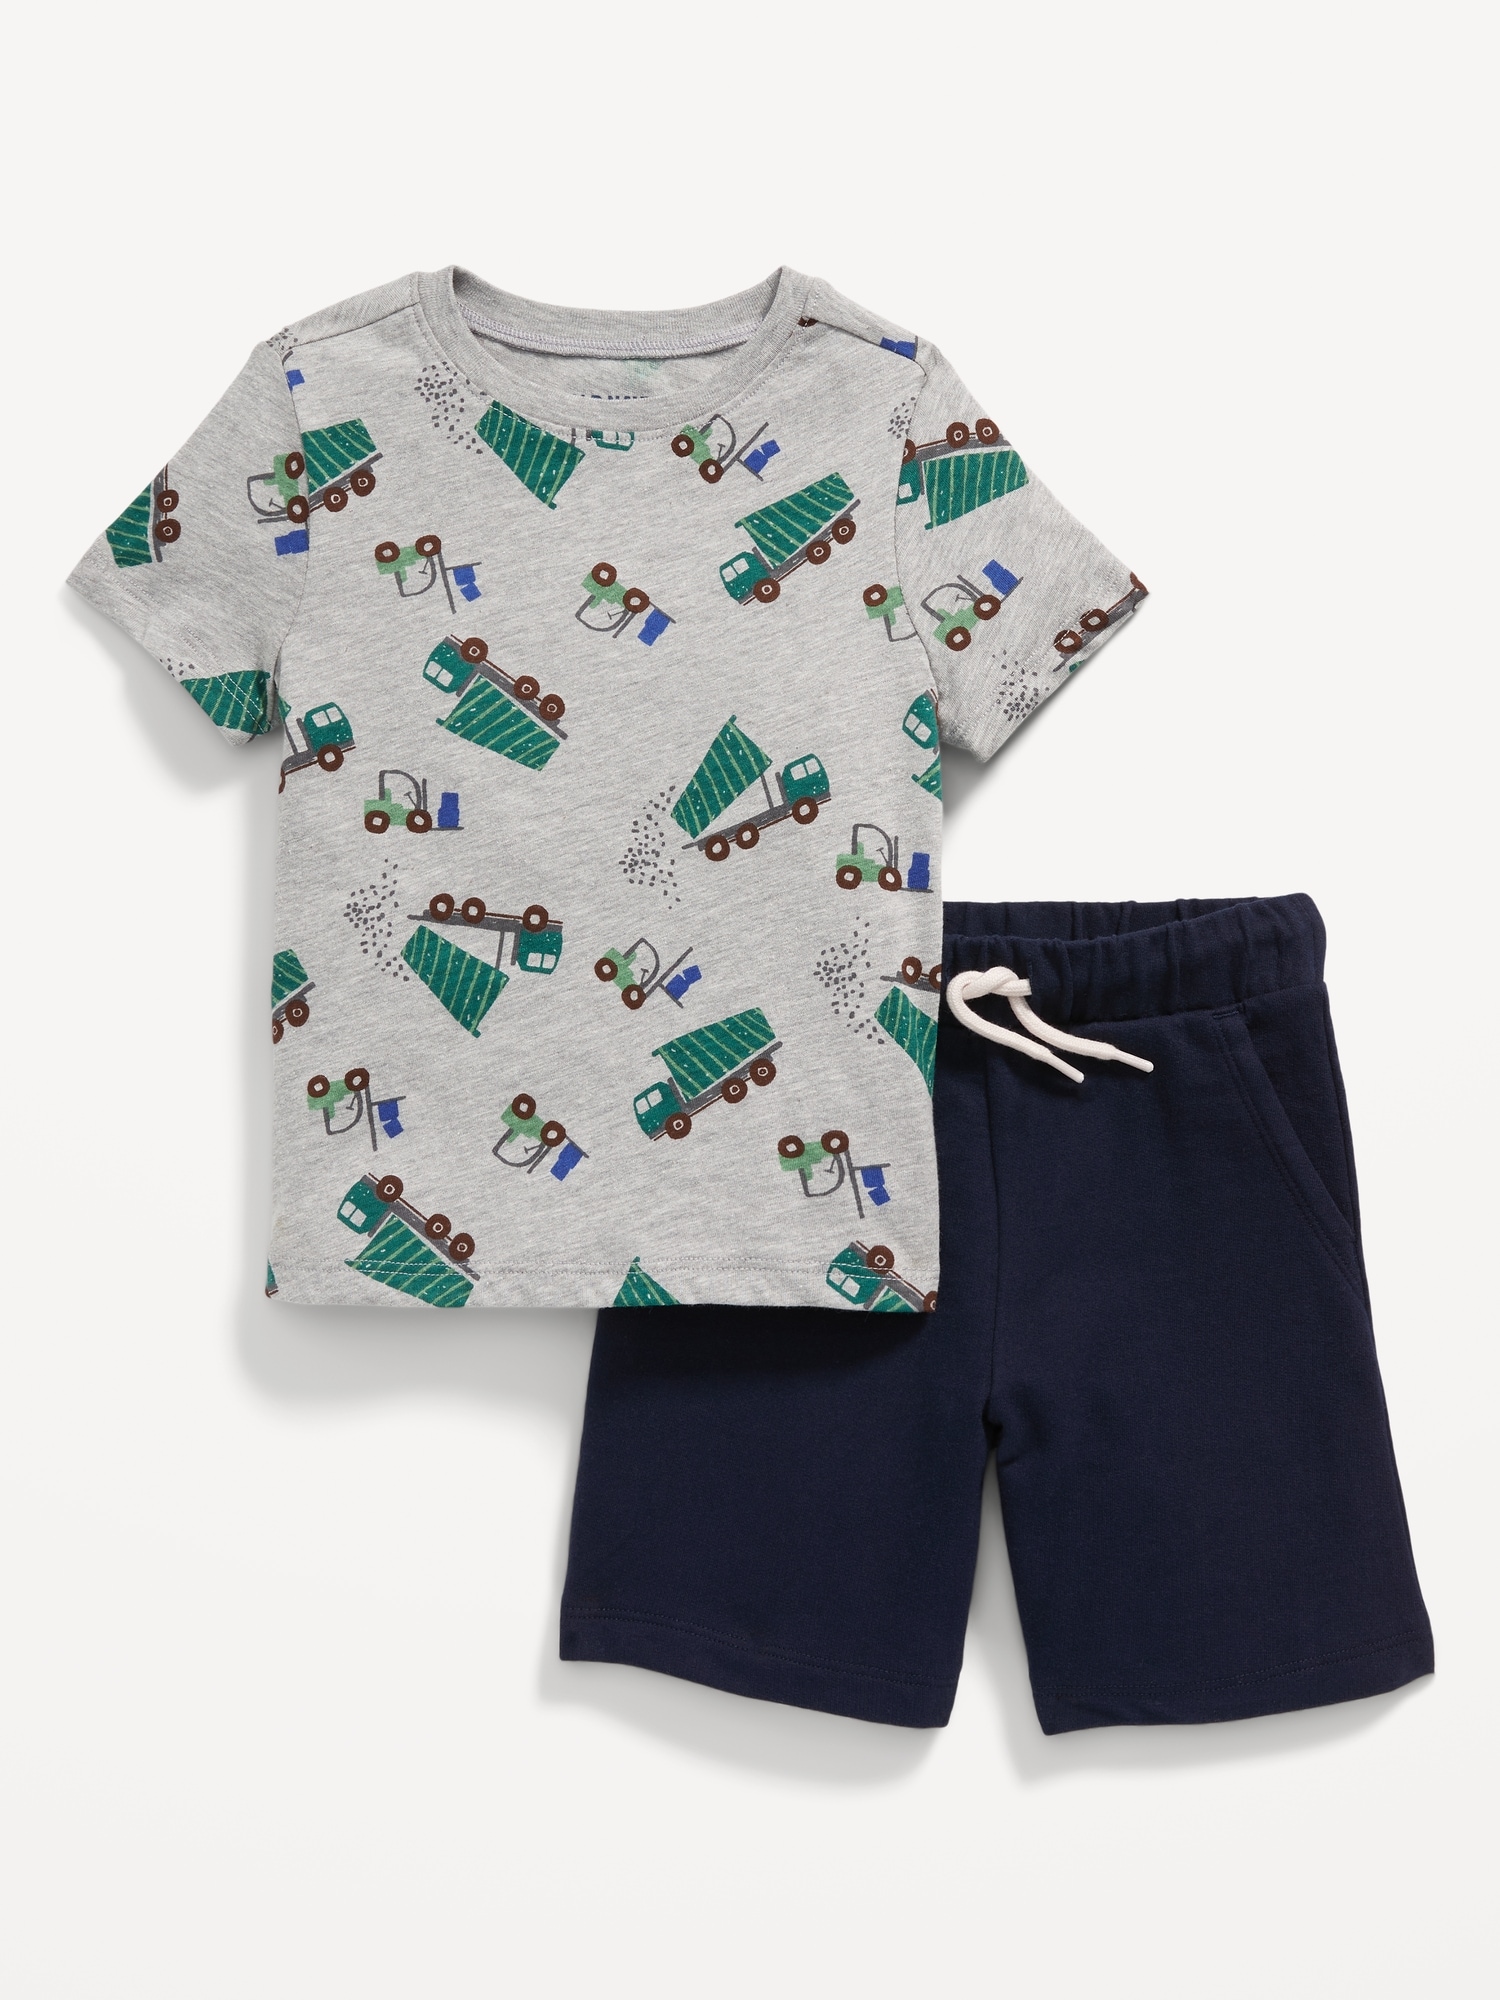 Printed Short-Sleeve T-Shirt and Pull-On Shorts Set for Toddler Boys